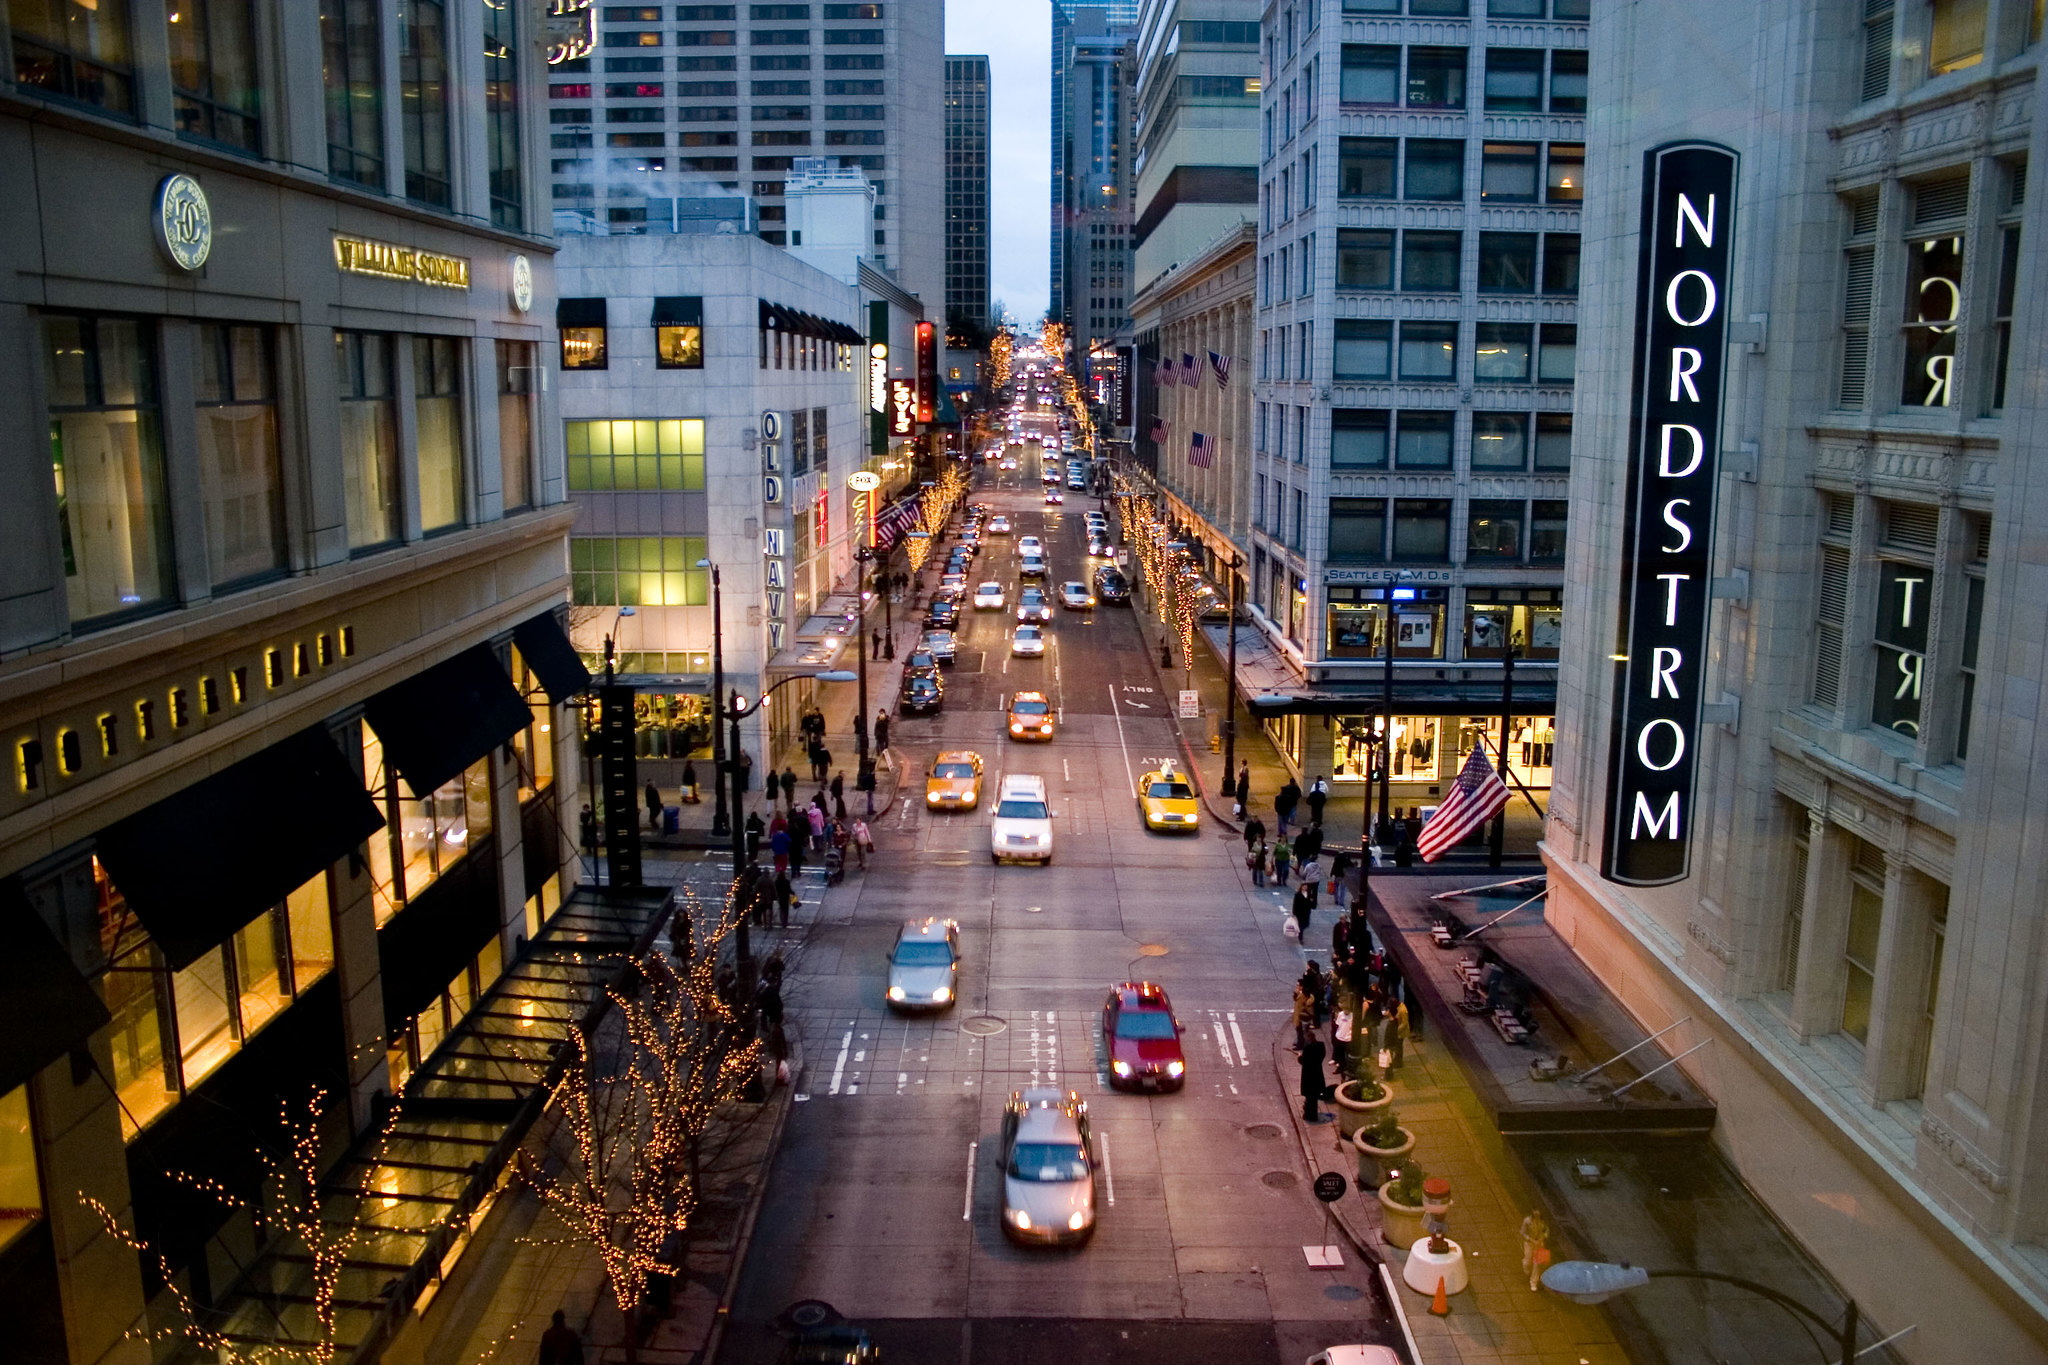 KUOW - Nordstrom returns to Western Washington with a modified